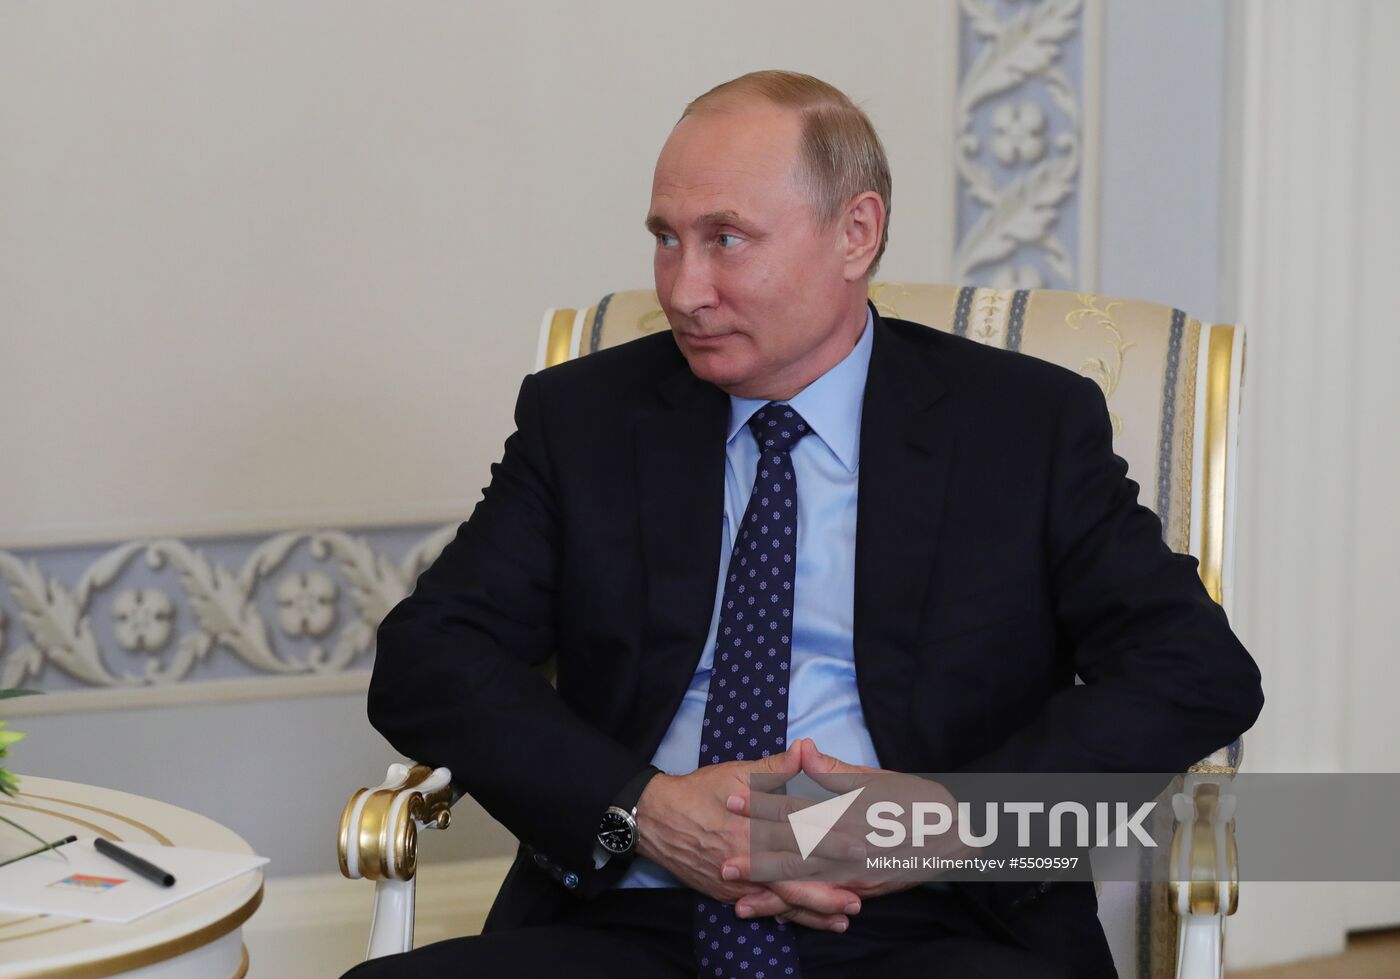 Russian President Vladimir Putin meets with President of Central African Republic Faustin-Archange Touadera